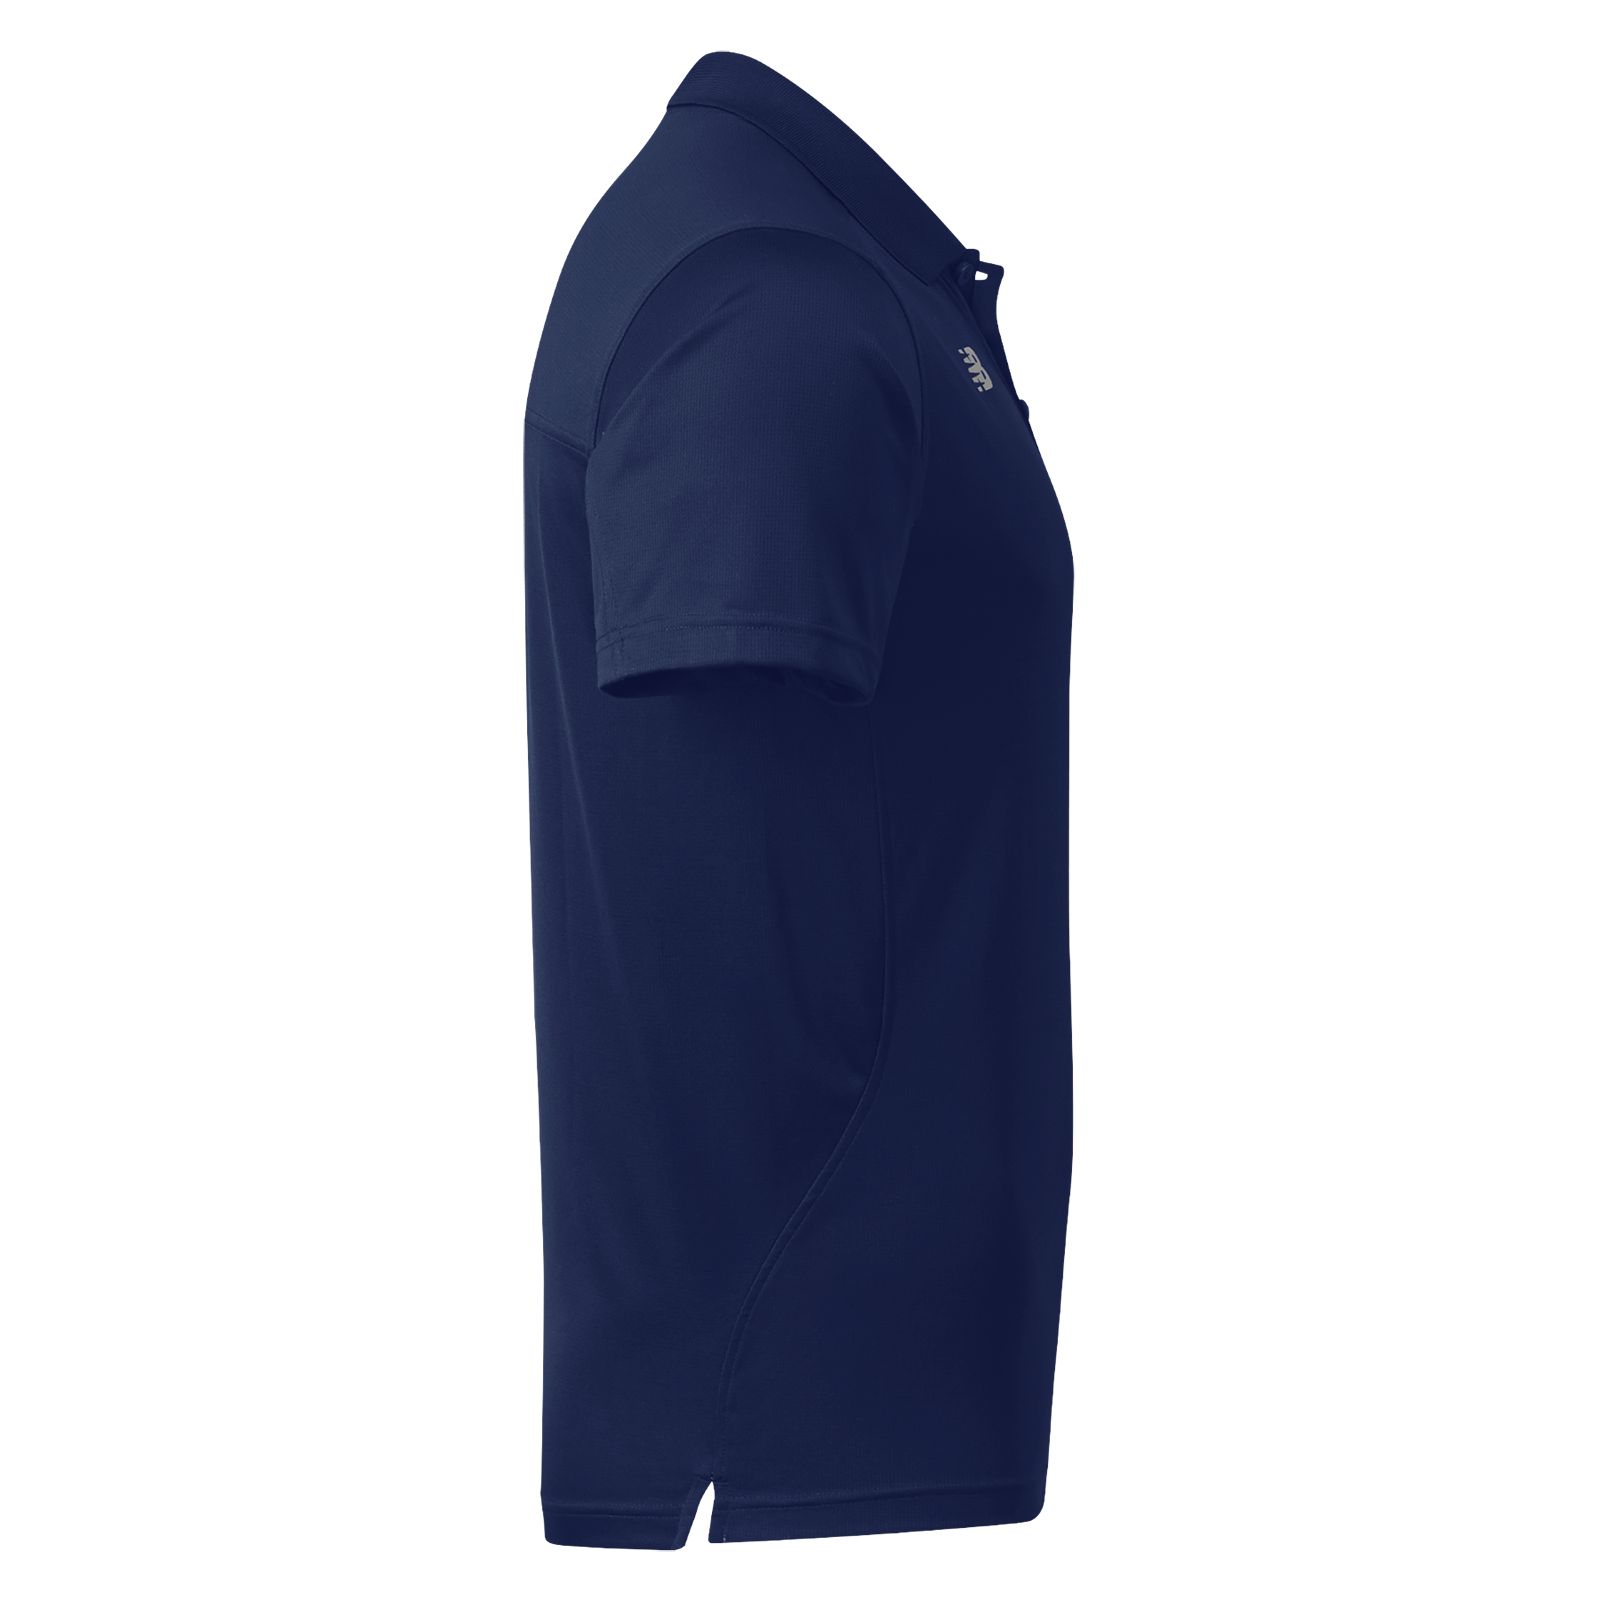 Men's Performance Tech Polo, Team Navy image number 3